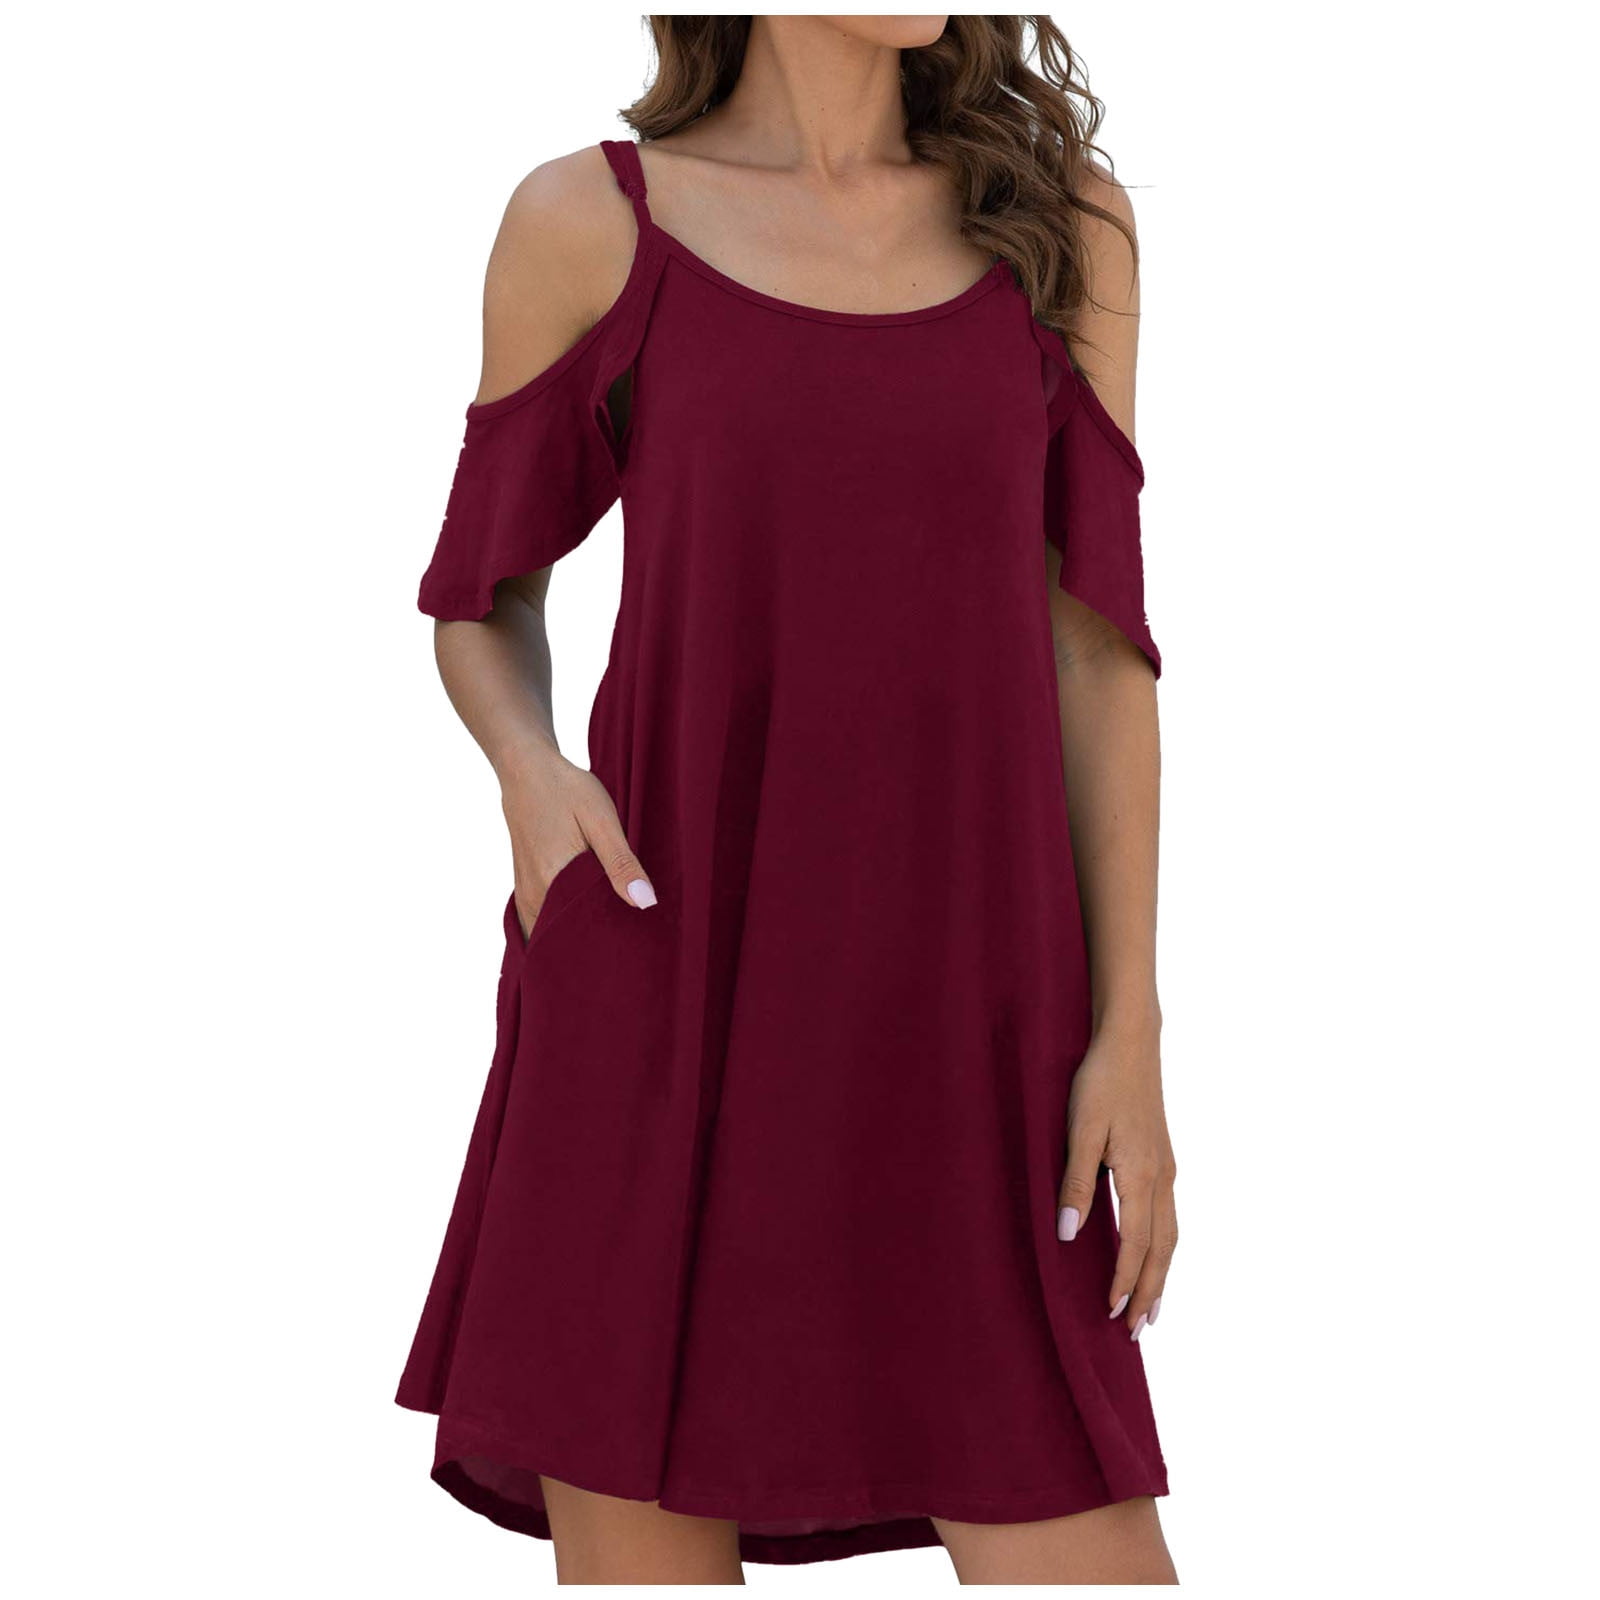 Wocleiliy Women's Summer Casual Dress Cold Shoudler Ruffle Sleeves Dresses  With Pocket, please buy one or two sizes larger than normal - Walmart.com